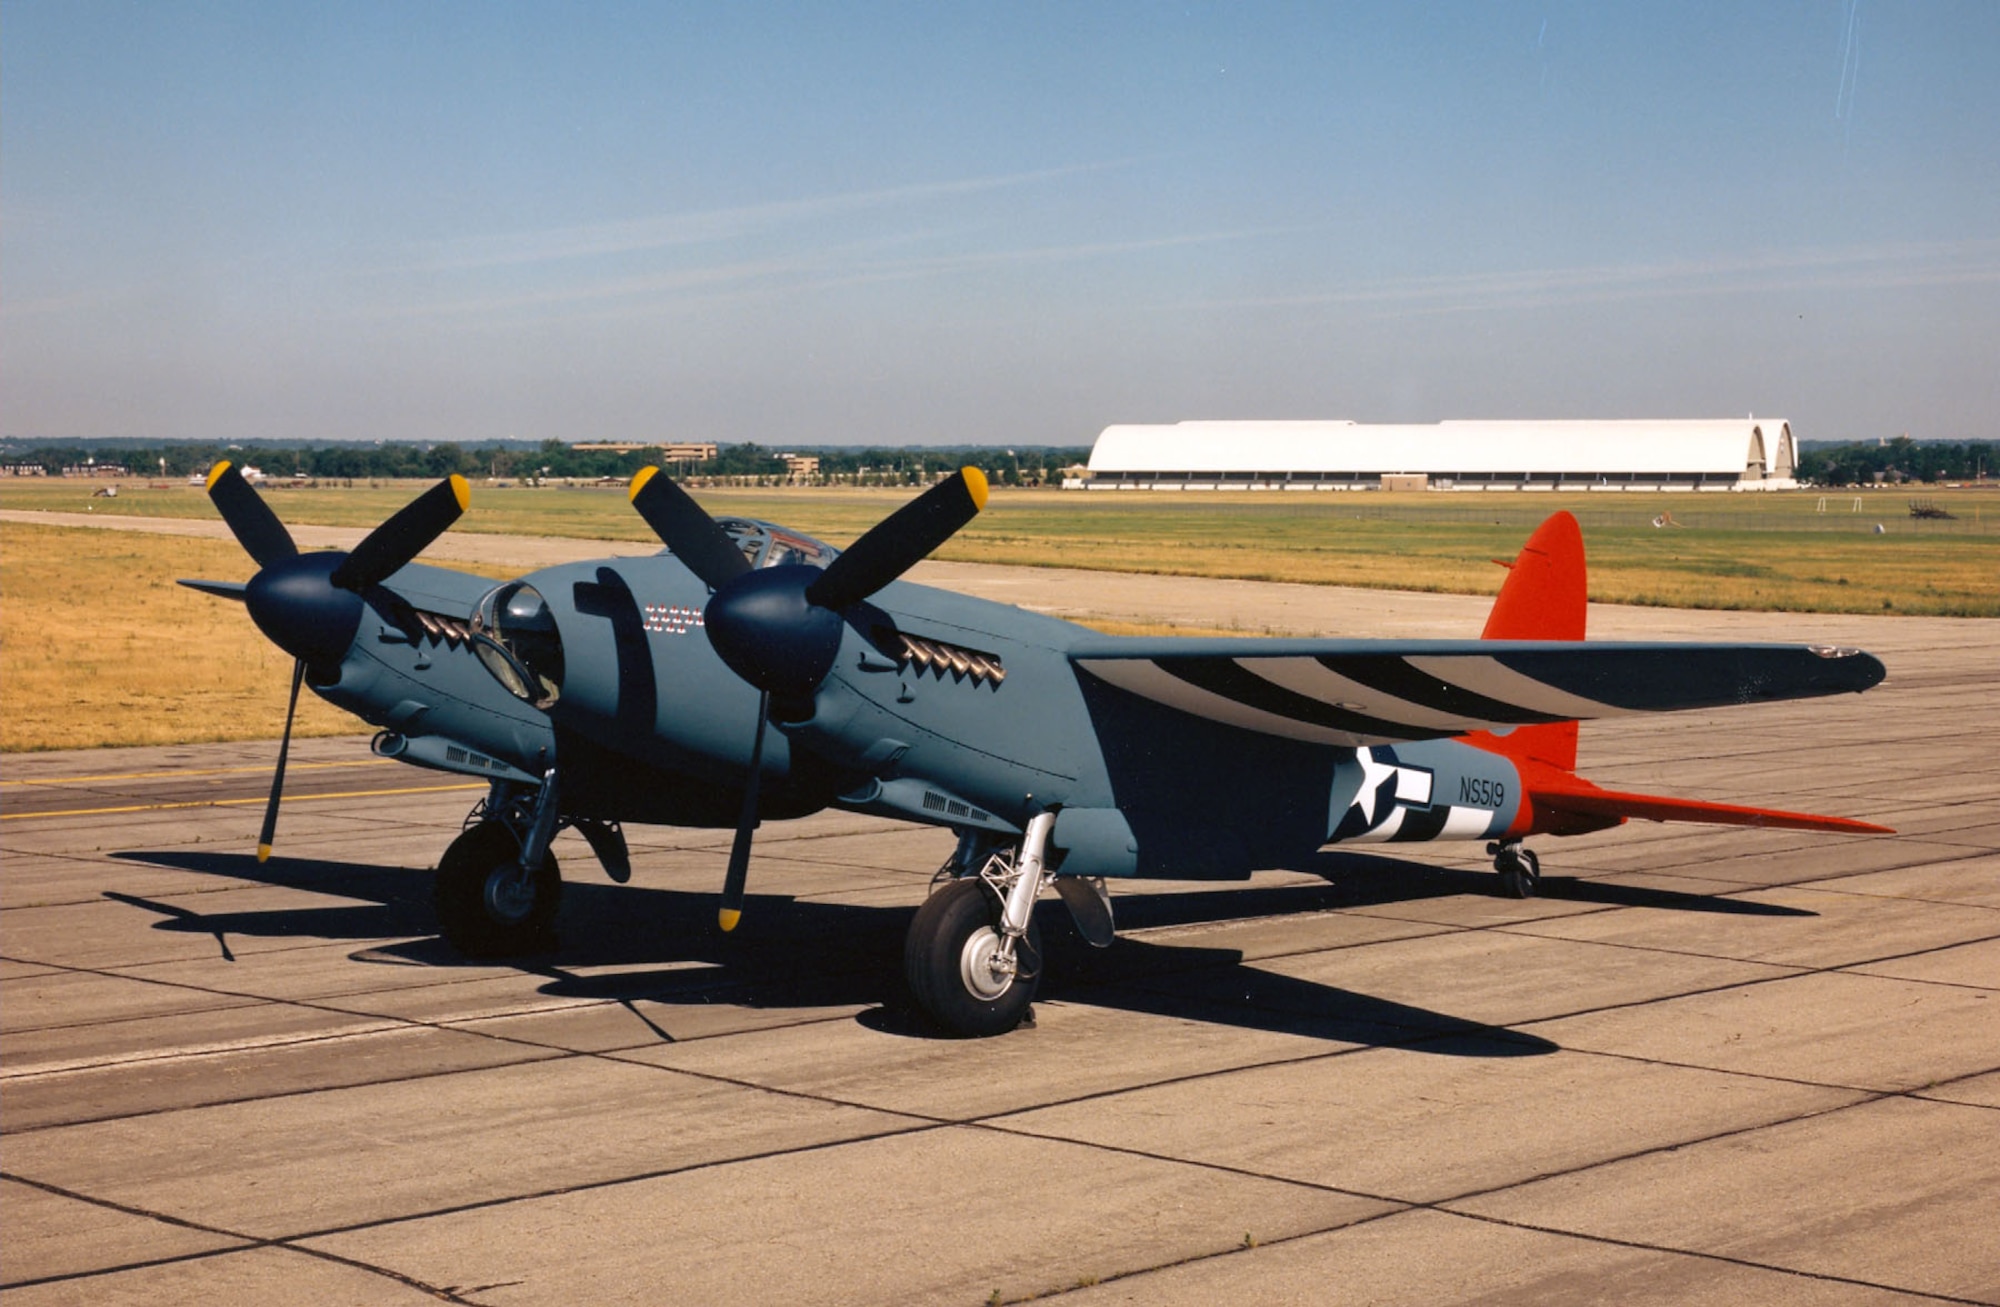 DAYTON, Ohio -- De Havilland DH 98 Mosquito at the National Museum of the United States Air Force. (U.S. Air Force photo)